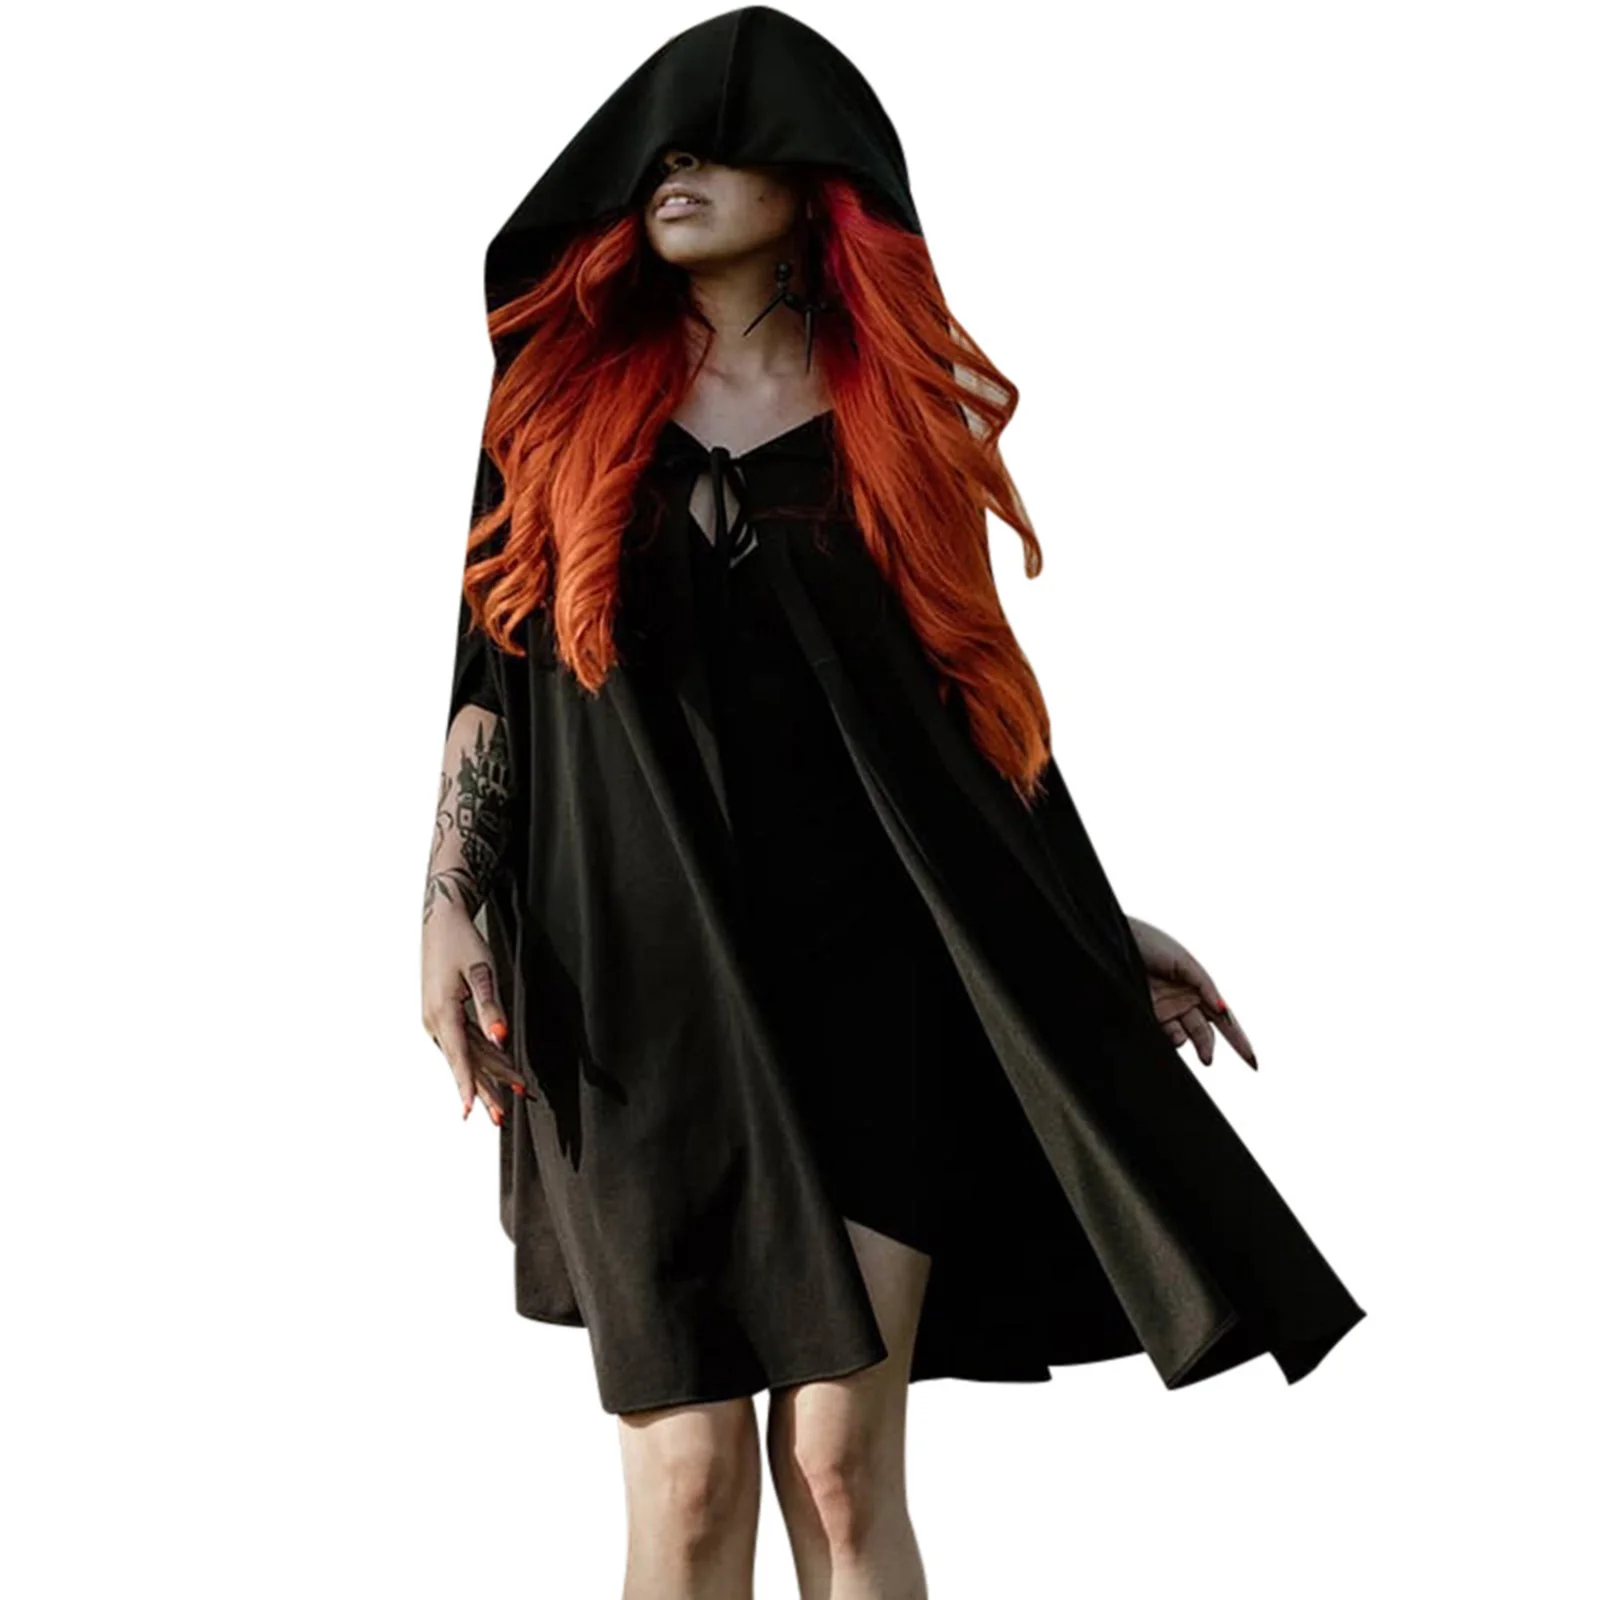 

Women Goth Dark Cosplay Cloak Girls Solid Color Hooded Tied Sleeveless Slit Mantle Cape for Halloween Party Role-Play Black